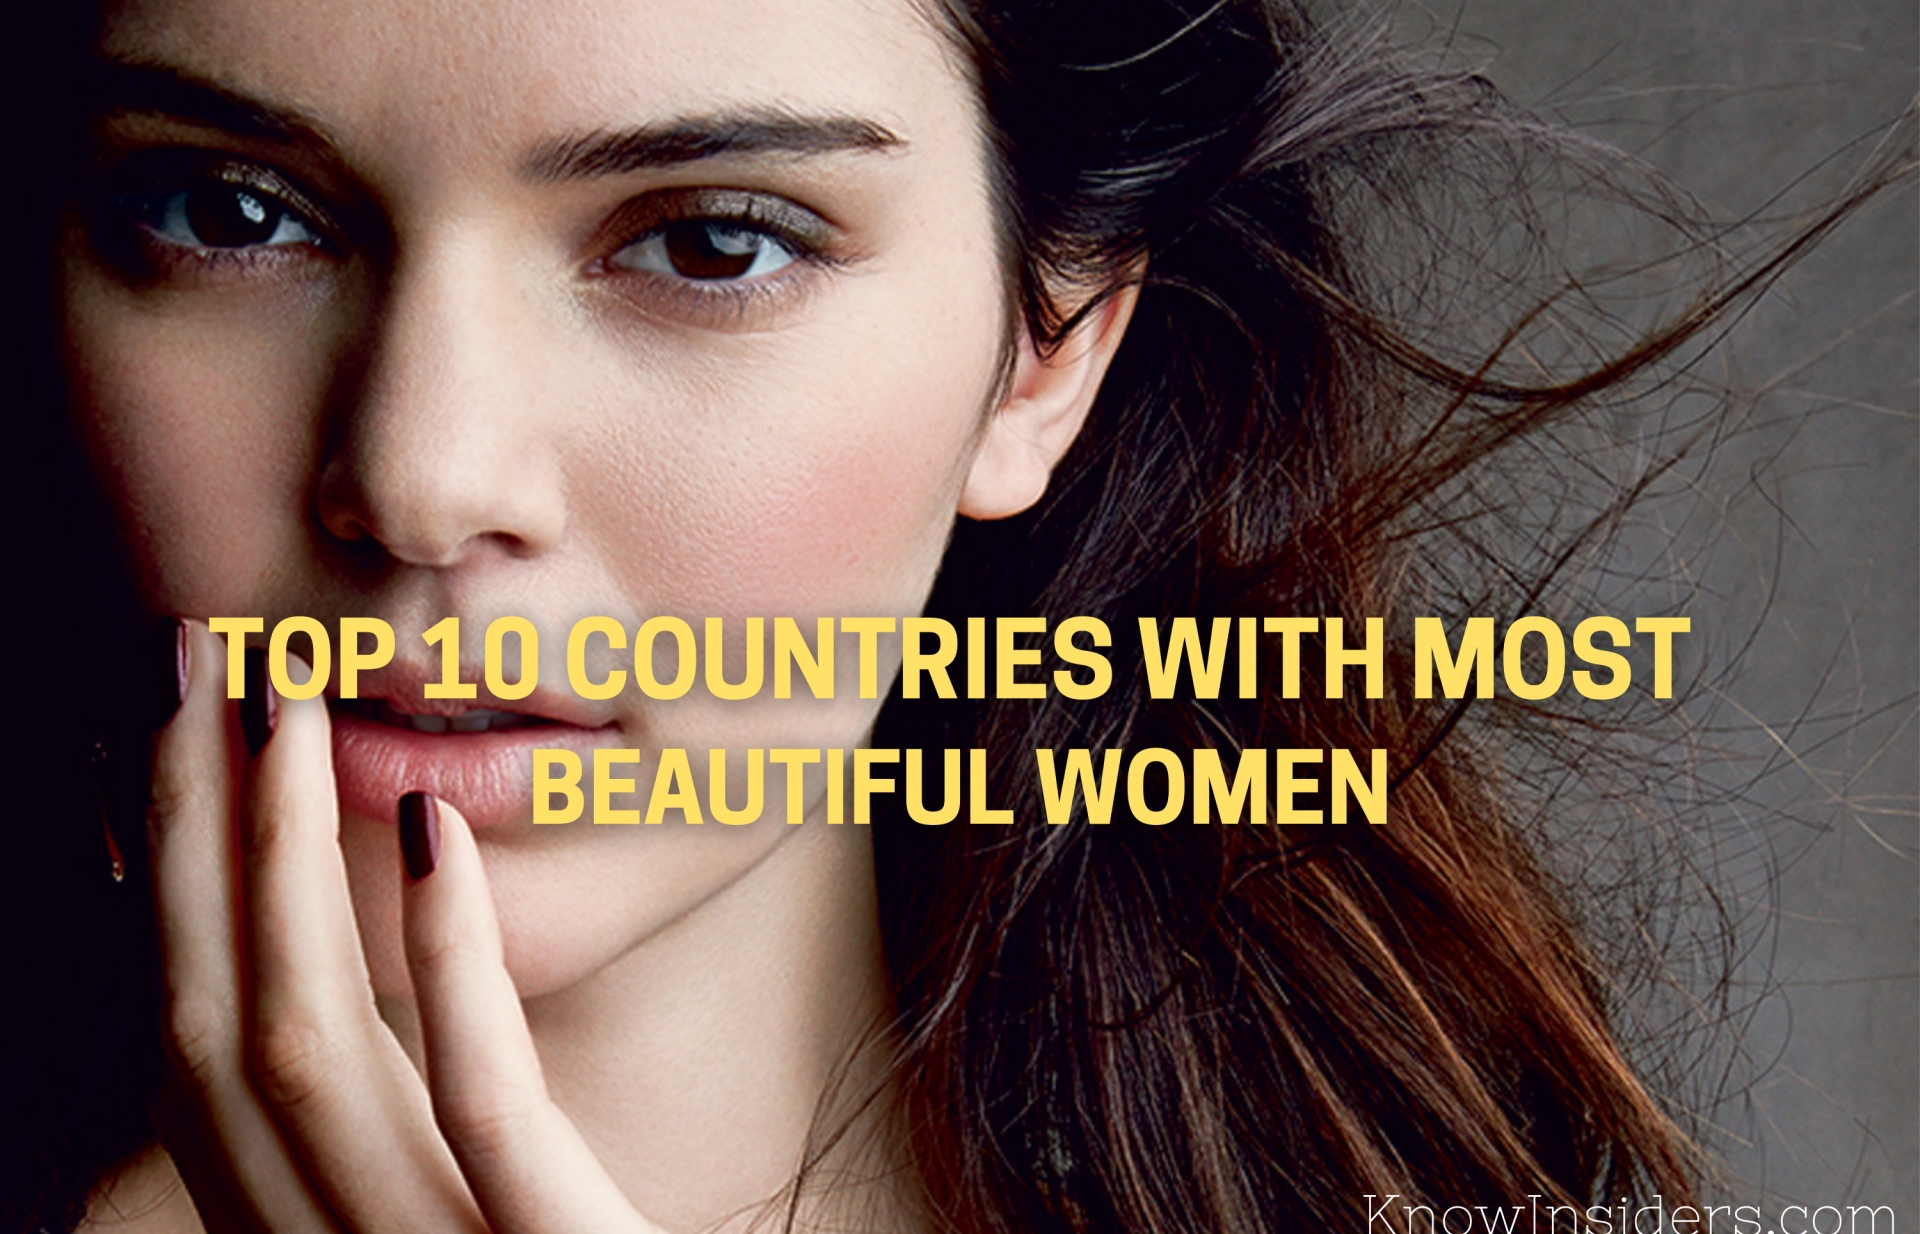 Top 10 Countries Having Most Beautiful Women in the World